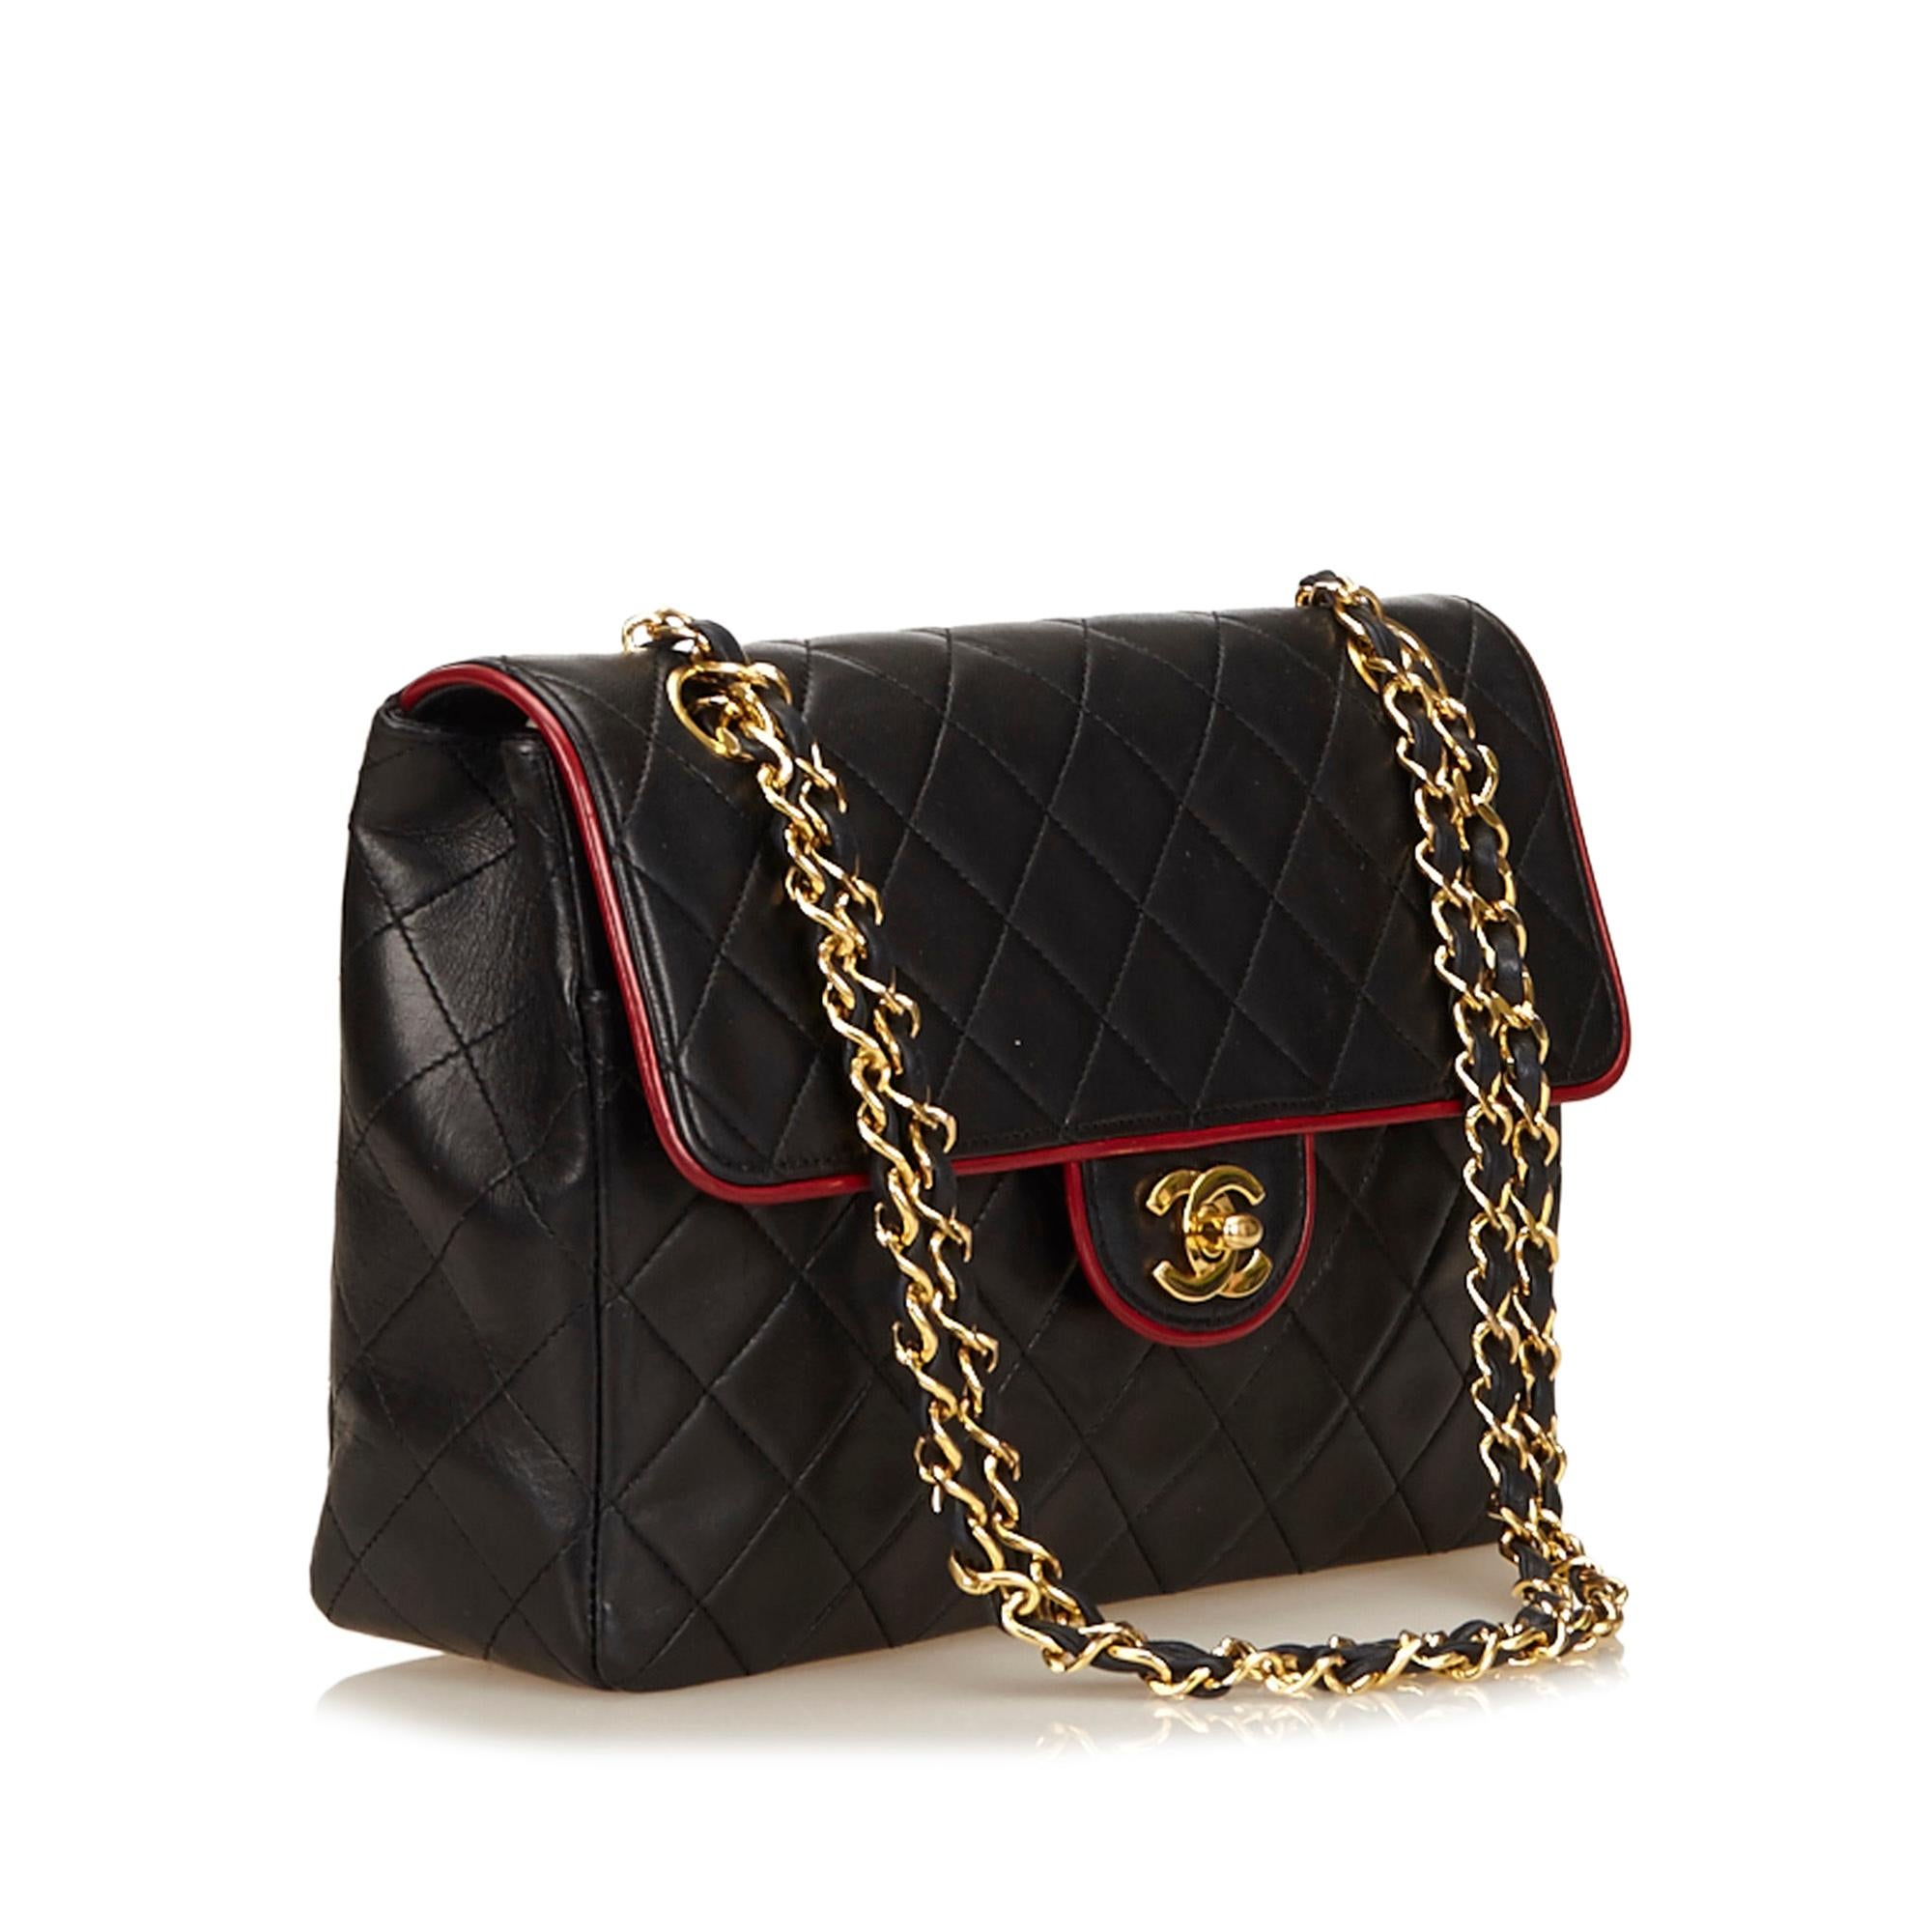 This Chanel shoulder bag features a matelasse quilted leather body trimmed with red piping, a thick double gold-tone shoulder chain, and a front flap with interlocking CCs and a twist lock closure.

Serial number: 1393525
